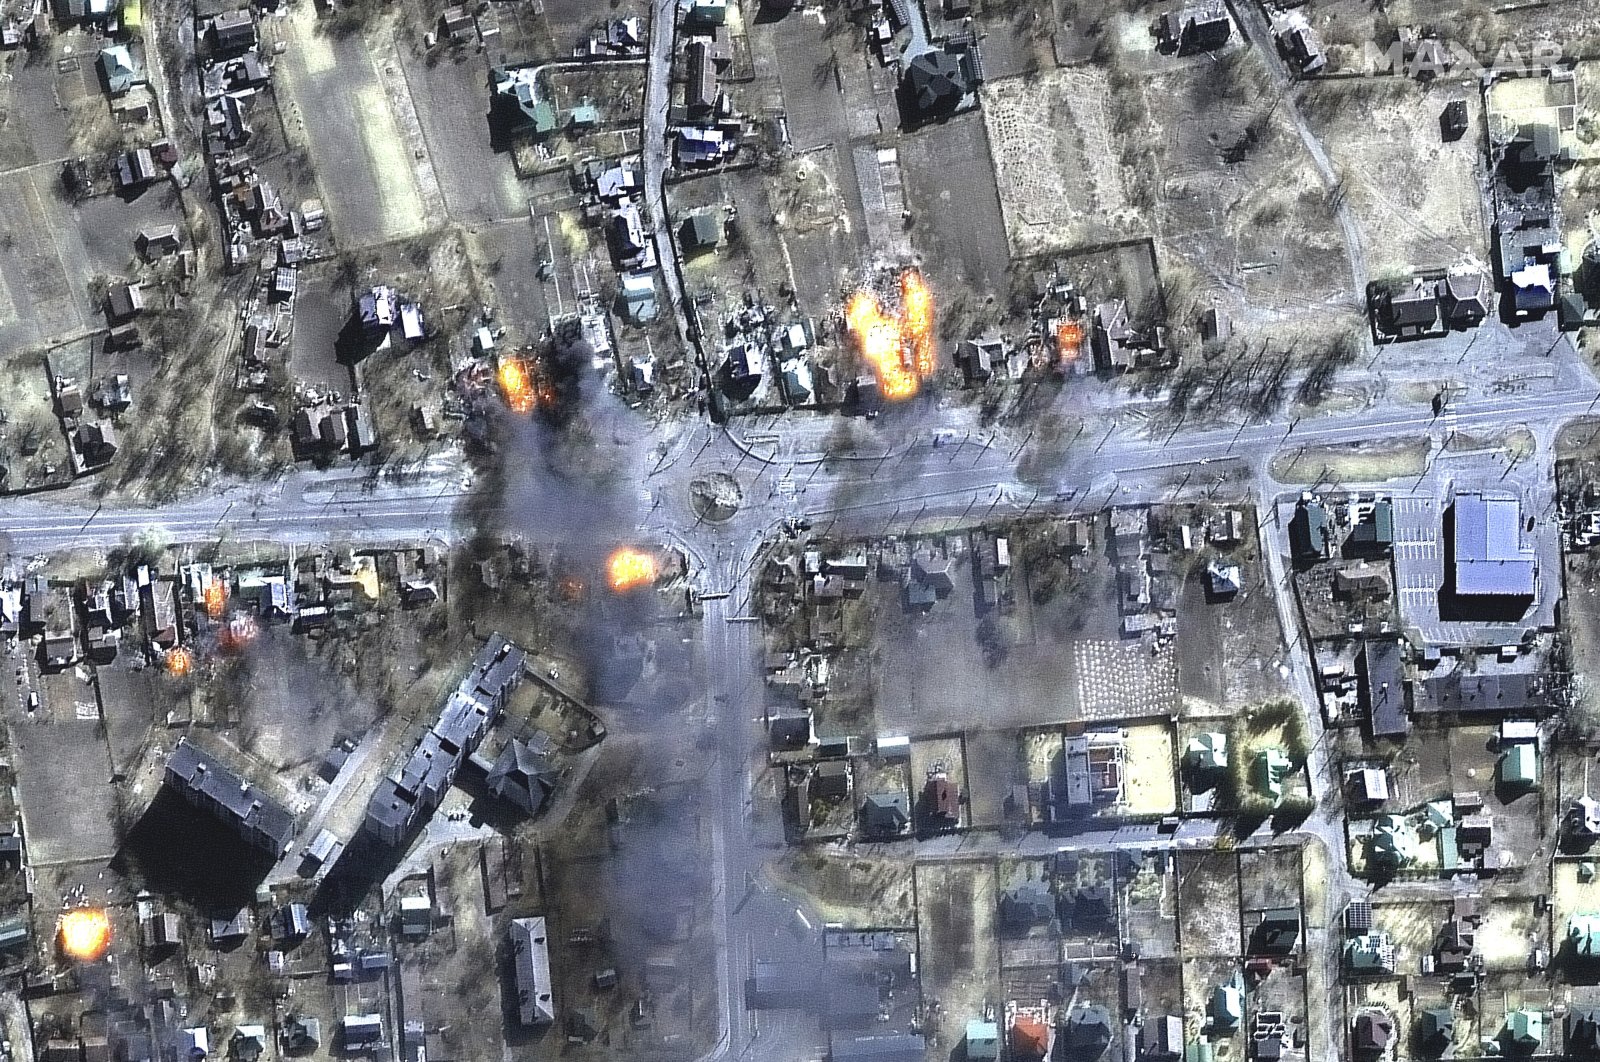 This satellite image provided by Maxar Technologies shows burning buildings in a residential area in northeast Chernihiv, Ukraine, March 16, 2022. (Maxar Technologies via AP)